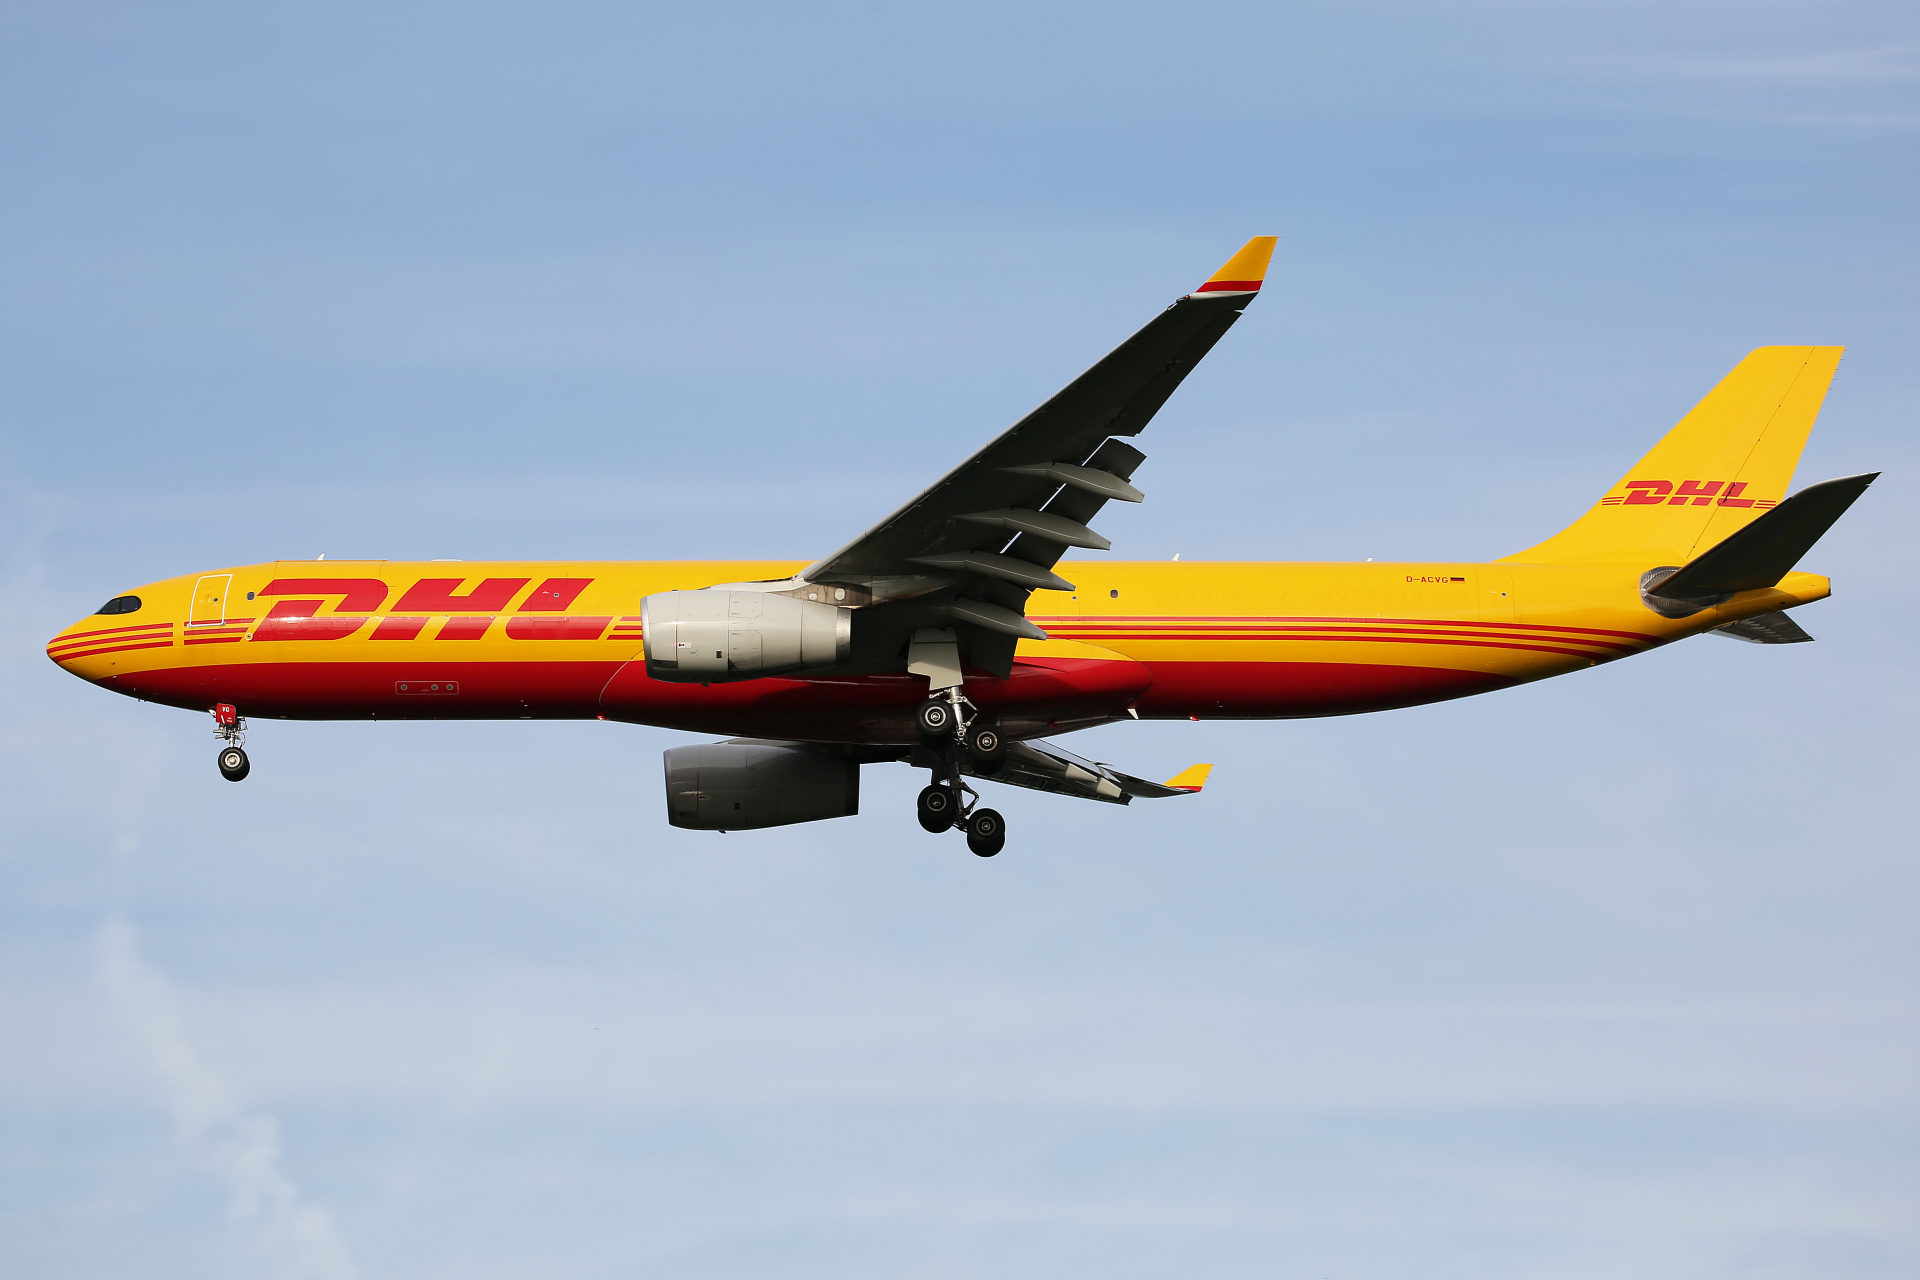 D-ACVG, DHL (EAT Leipzig) (Samoloty » Spotting na Schiphol » Airbus A330-300P2F)